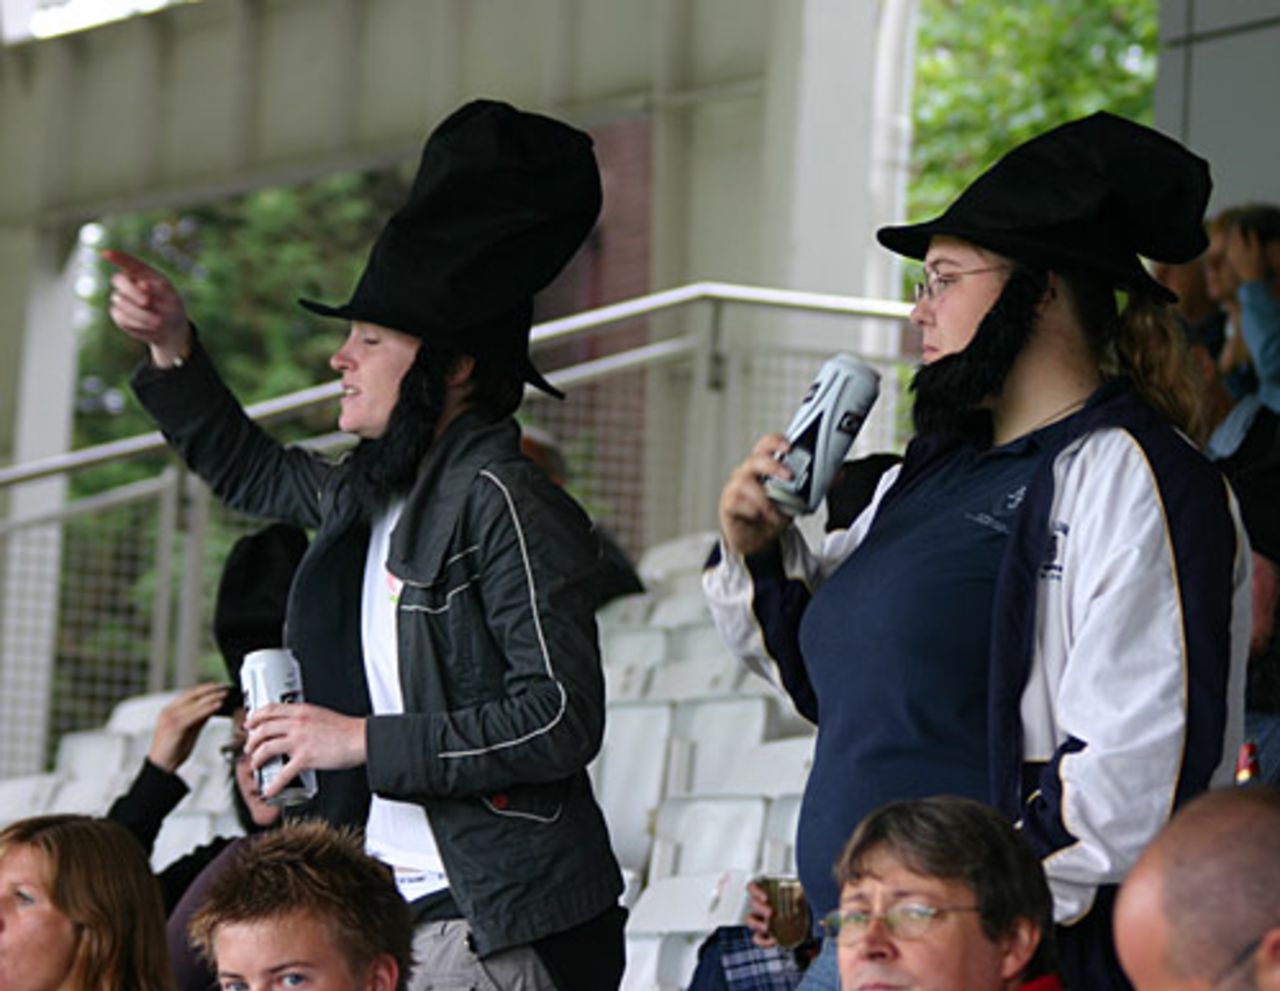 The fans get the beers in, and beards, while waiting for play to start, England Women v India Women, 1st ODI, Lord's, August 14, 2006